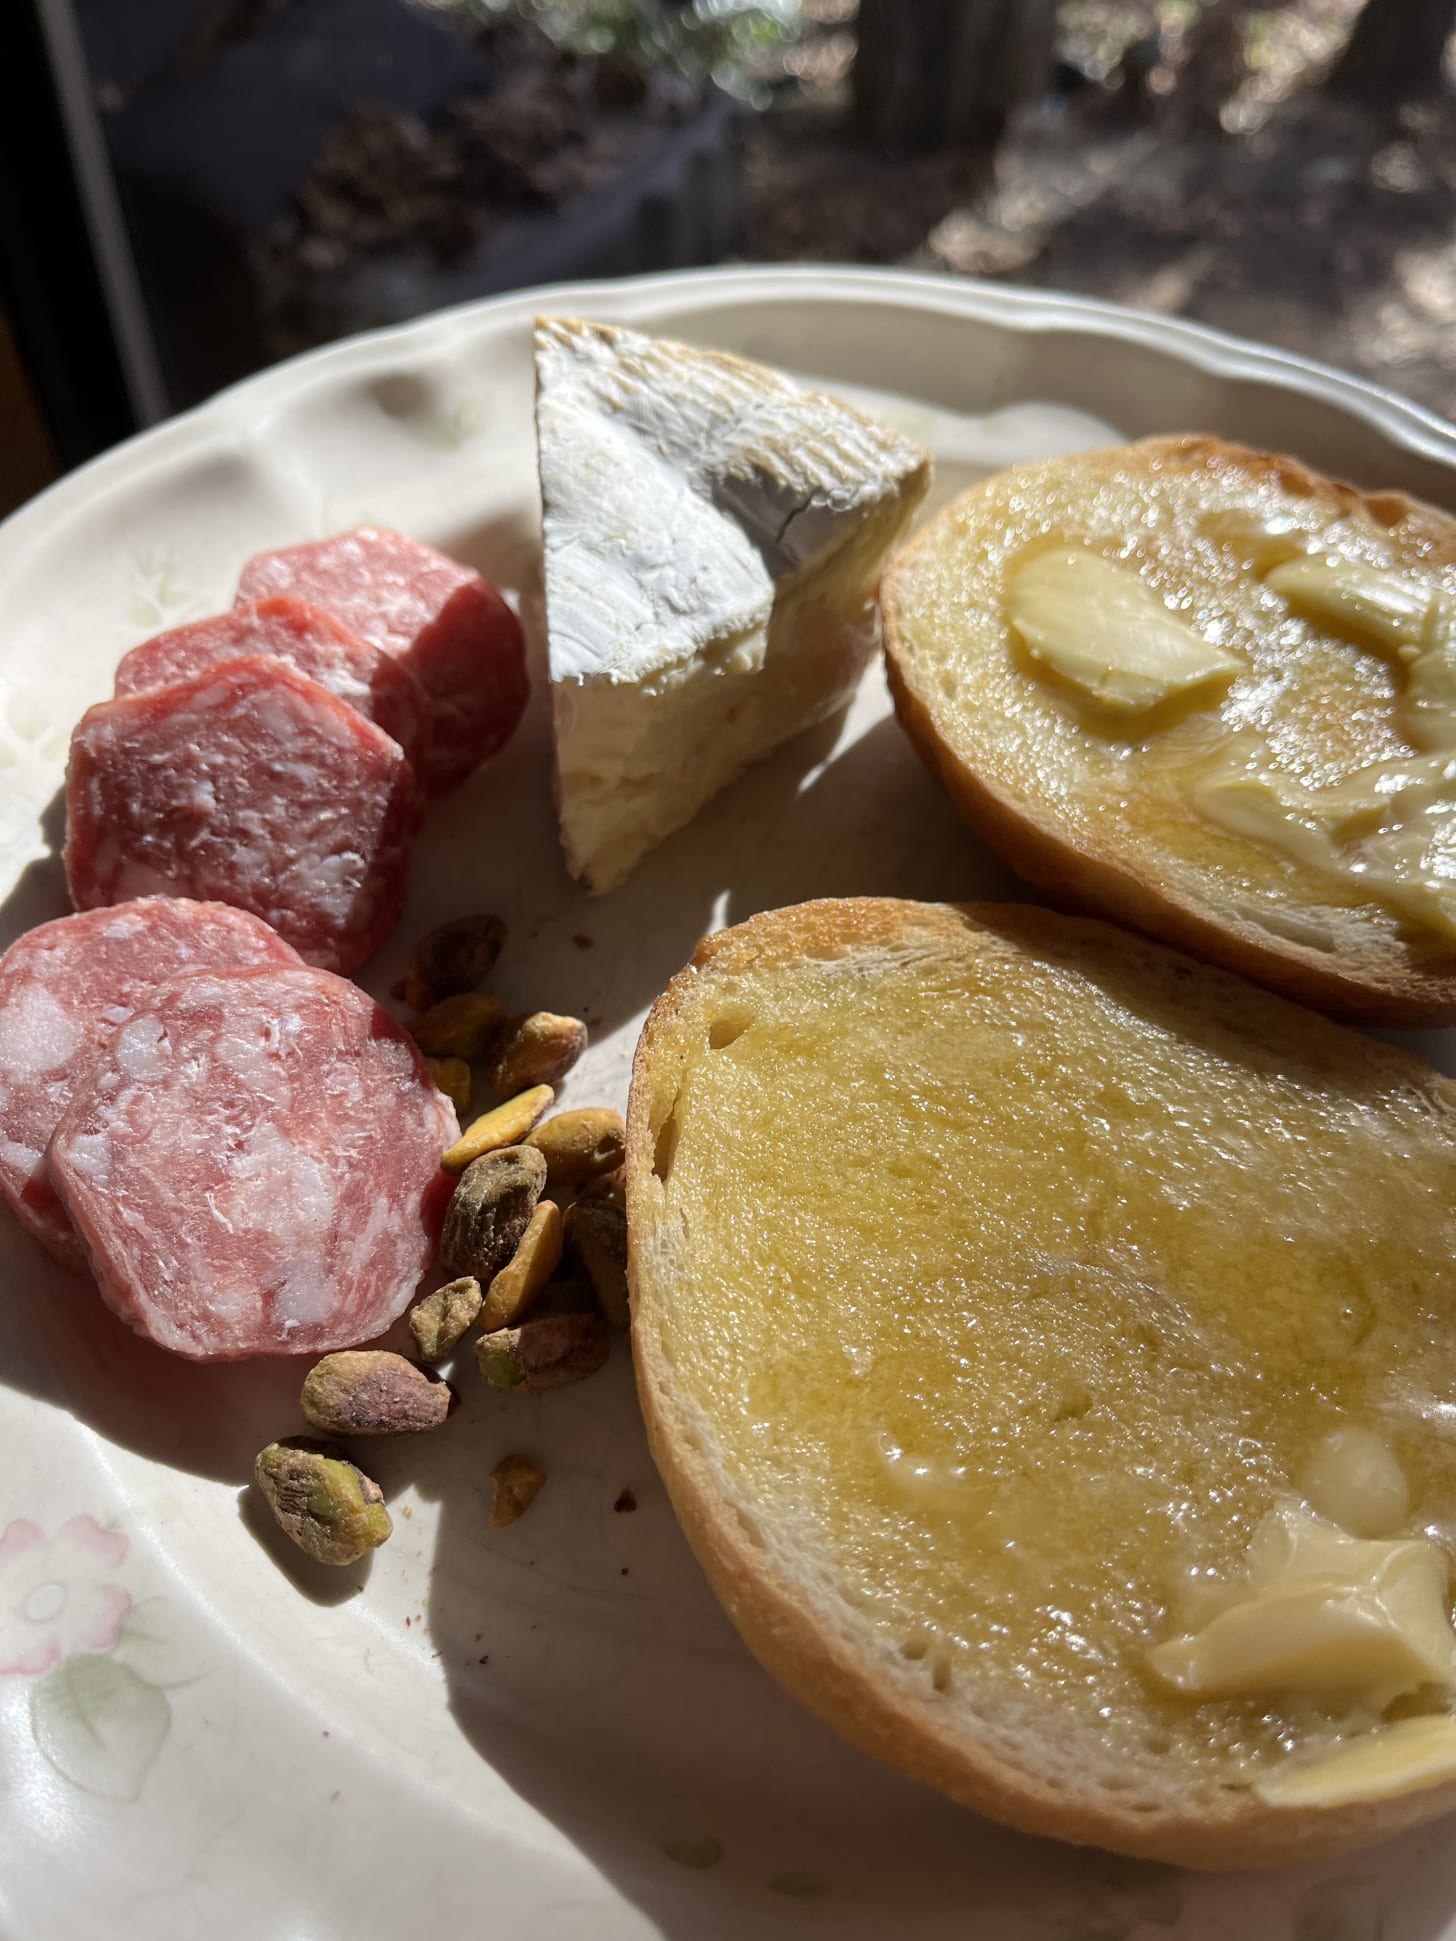 salami, pistachios, brie, and homemade sourdough bagels with grassfed butter